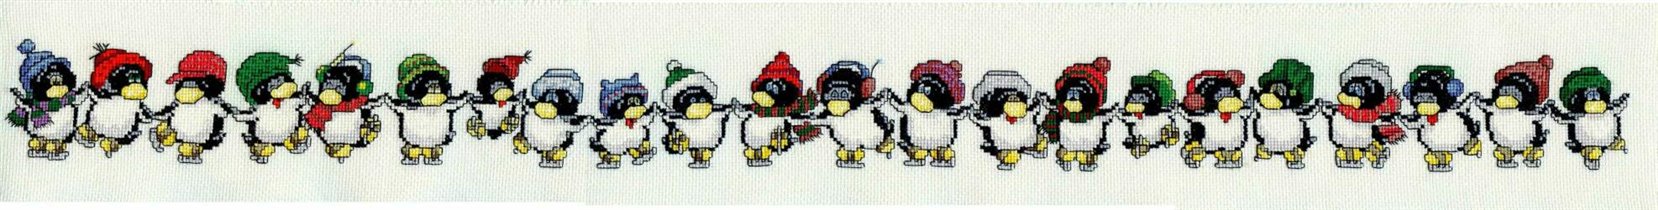 Pinguins on Ice